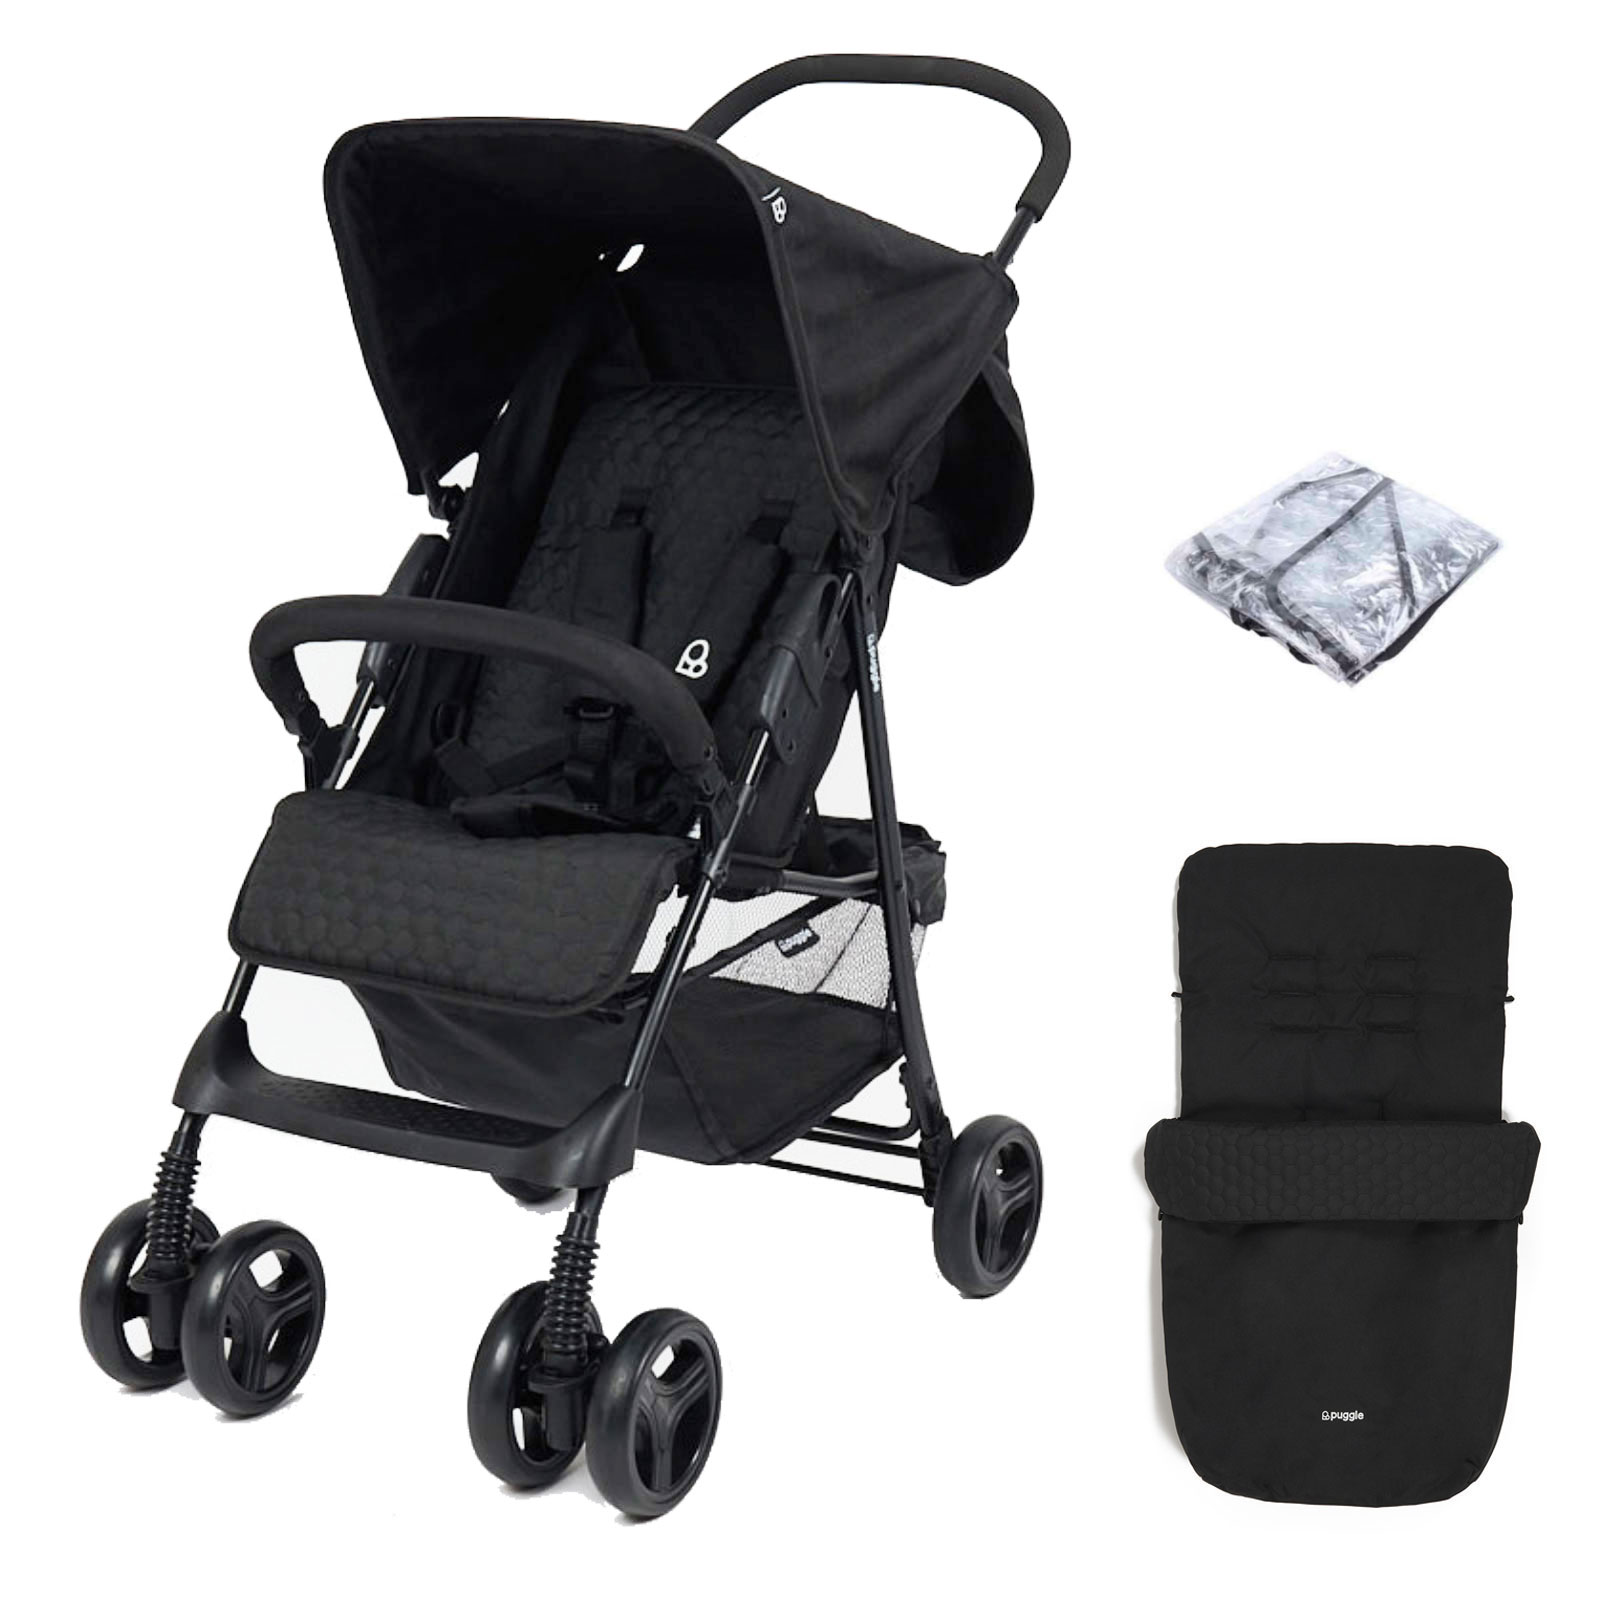 Puggle Holiday Luxe Pushchair Stroller with Raincover and Universal Footmuff – Storm Black